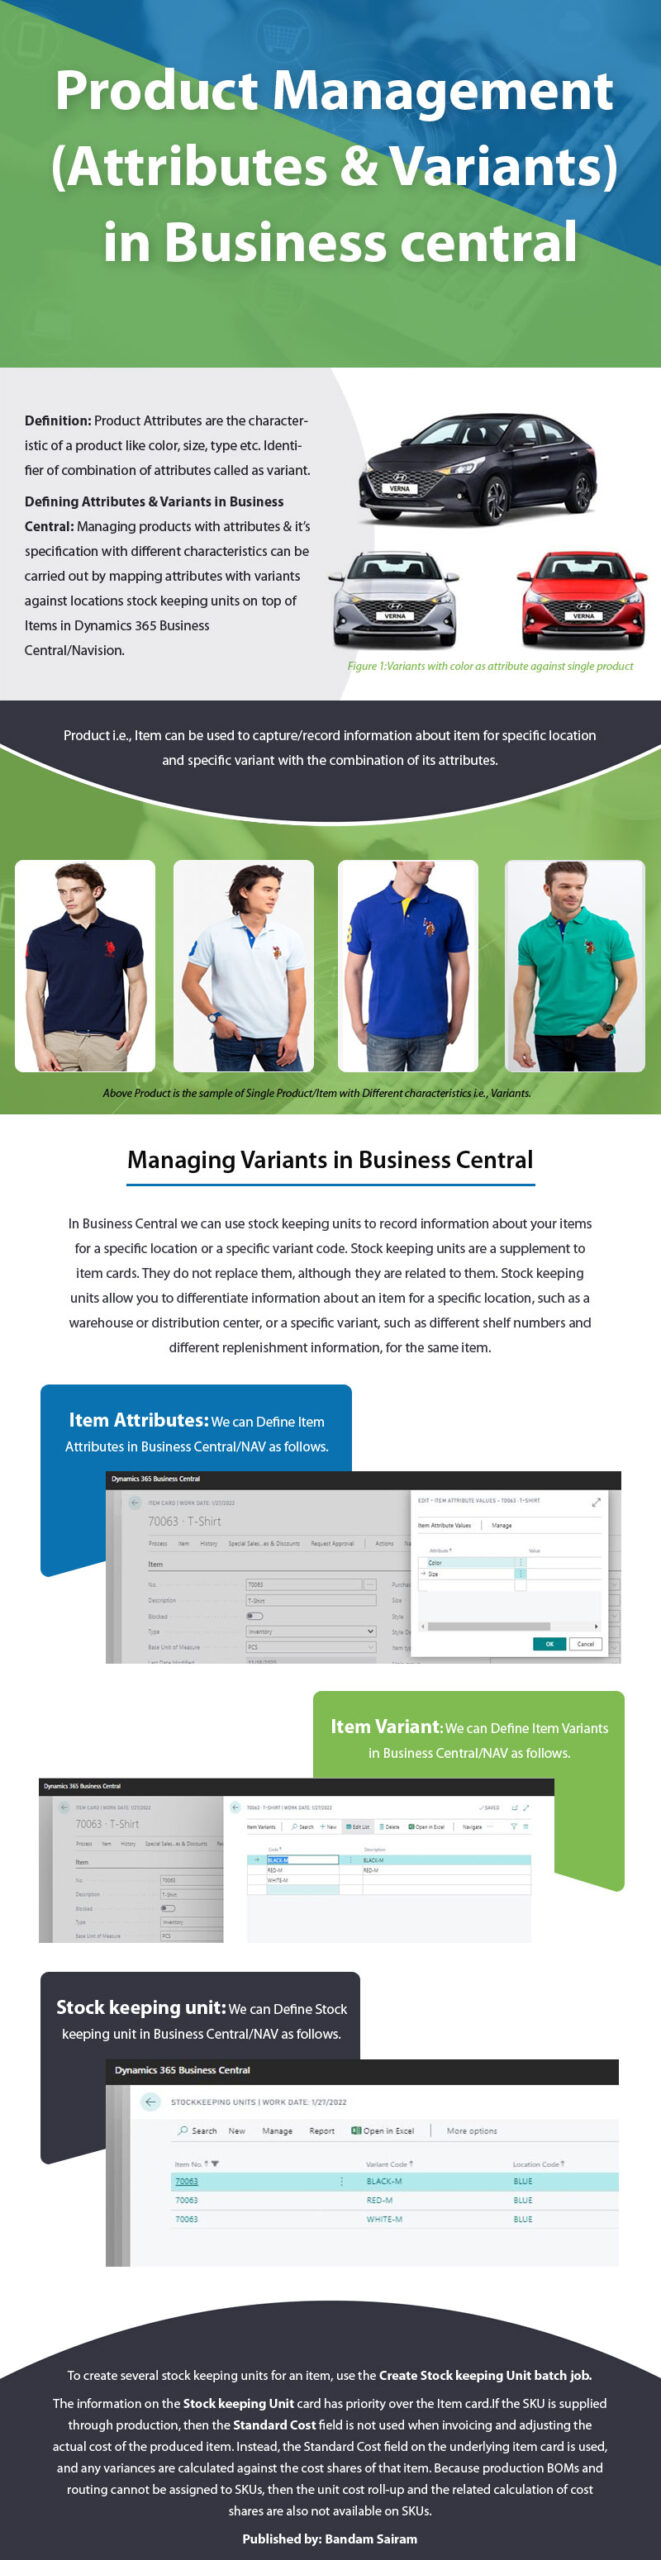 Product Management (Attributes & Variants) in Business Central